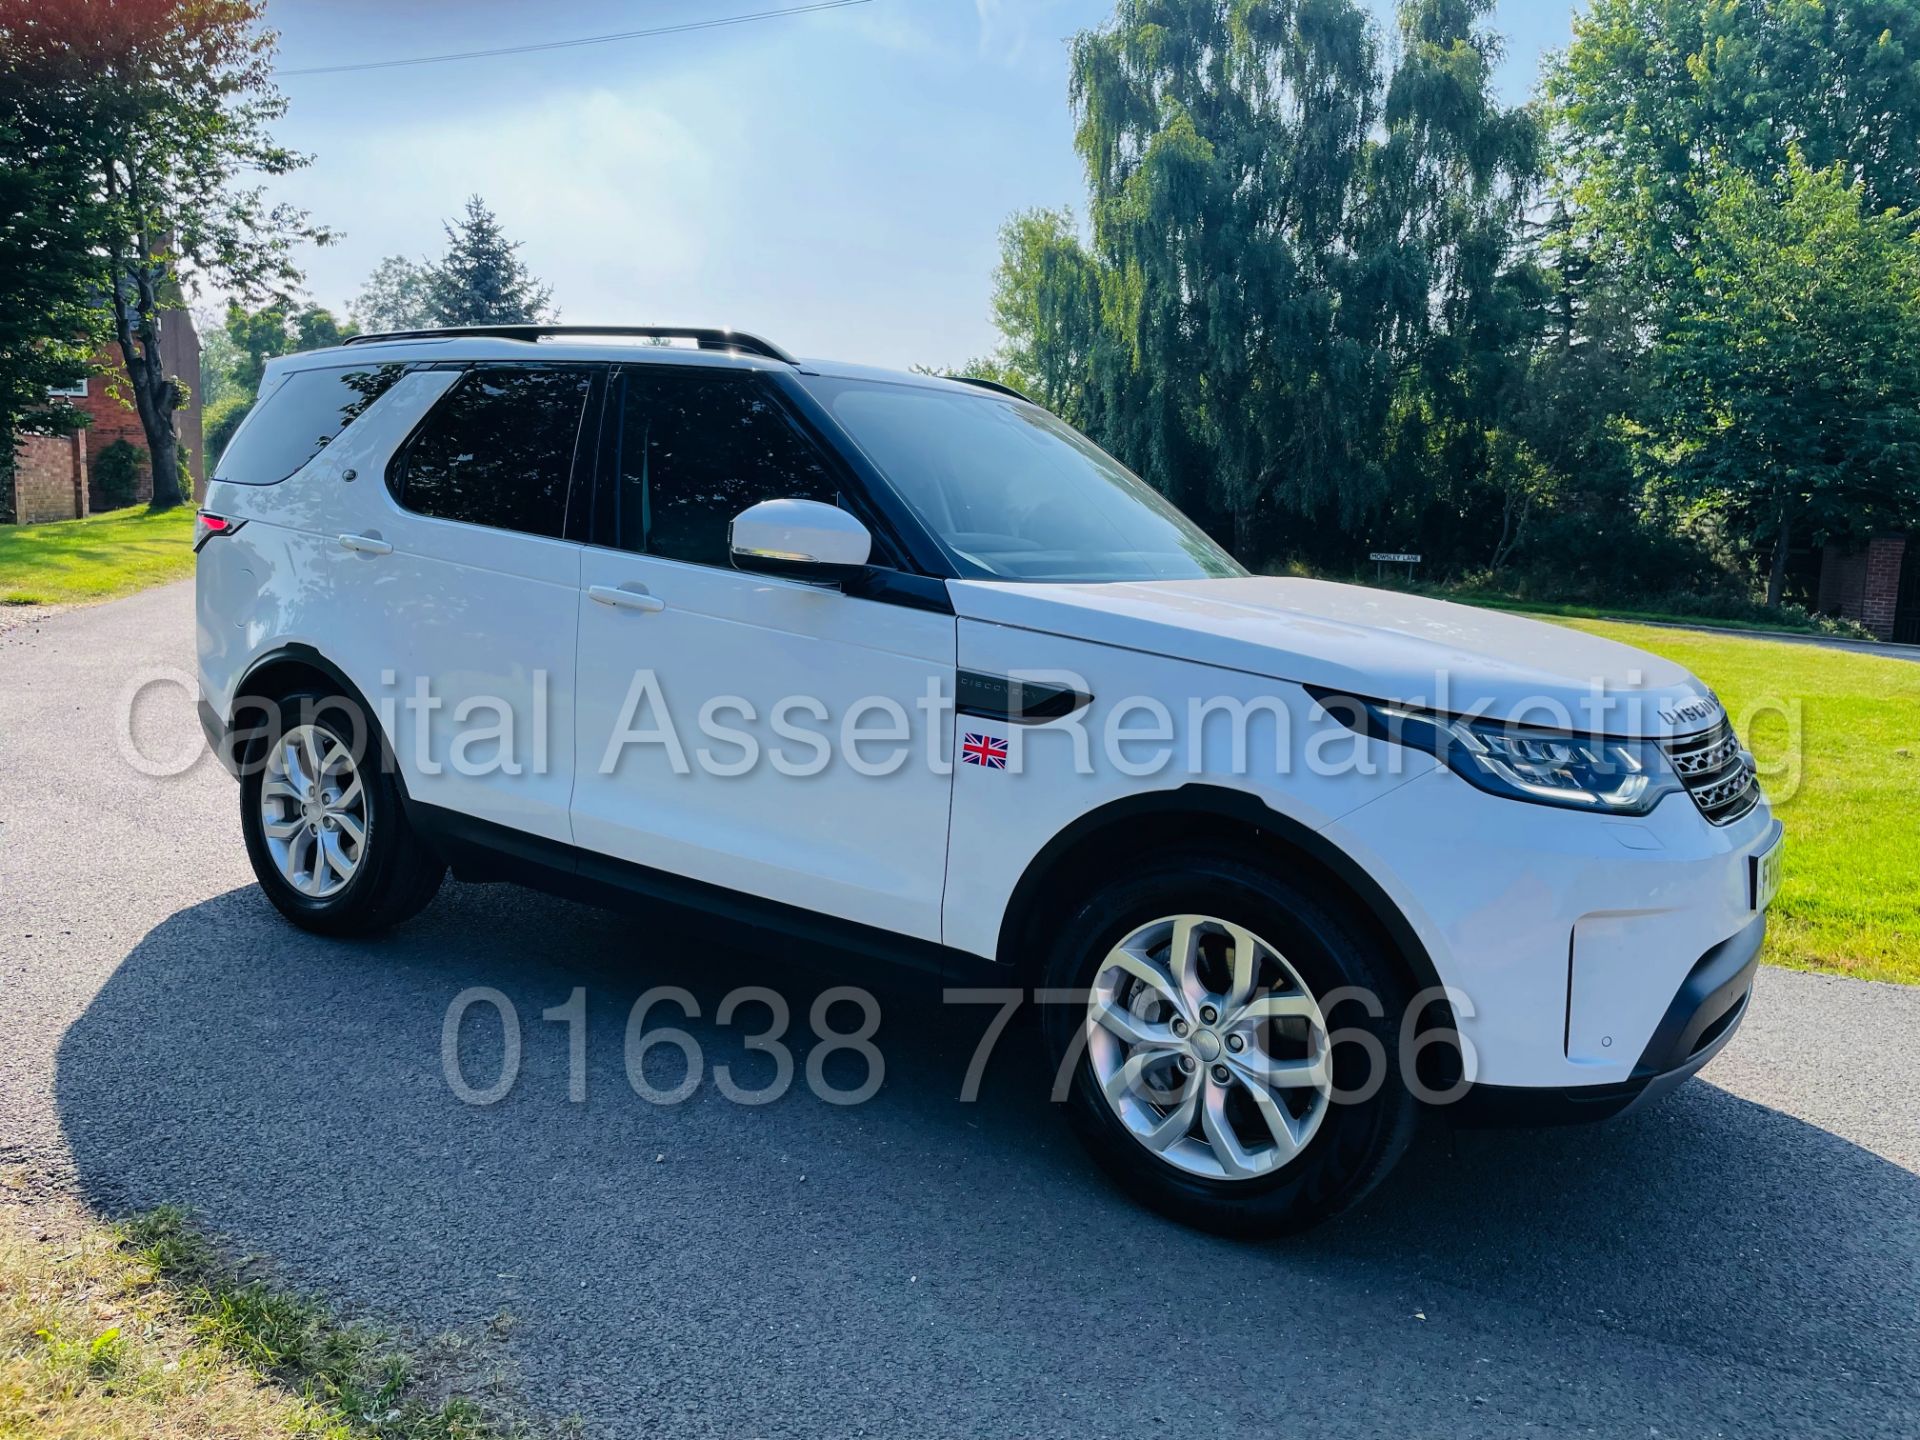 LAND ROVER DISCOVERY 5 *SE EDITION* SUV (2019 - EURO 6) '3.0 TD6 -306 BHP- 8 SPEED AUTO' *HUGE SPEC*